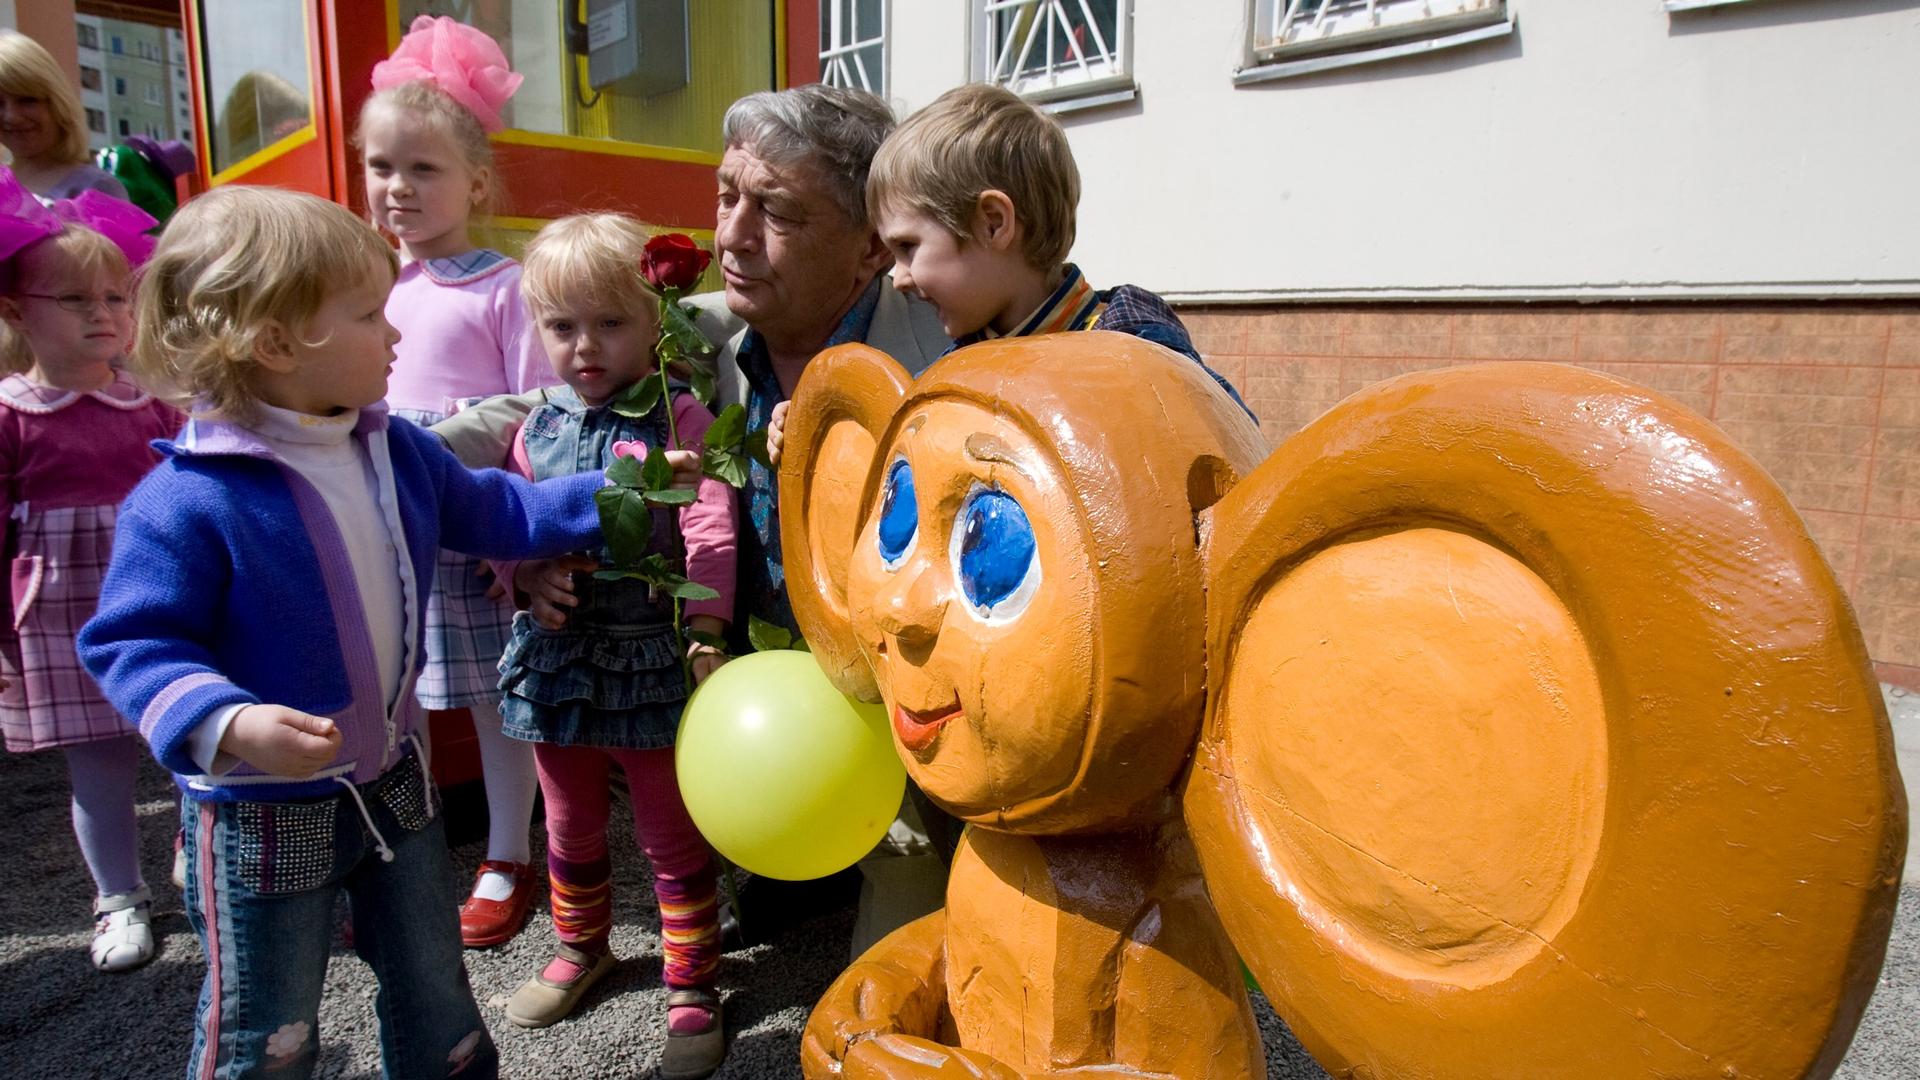 A man poses with small children next to a wooden image of the cartoon character Chebrashka.